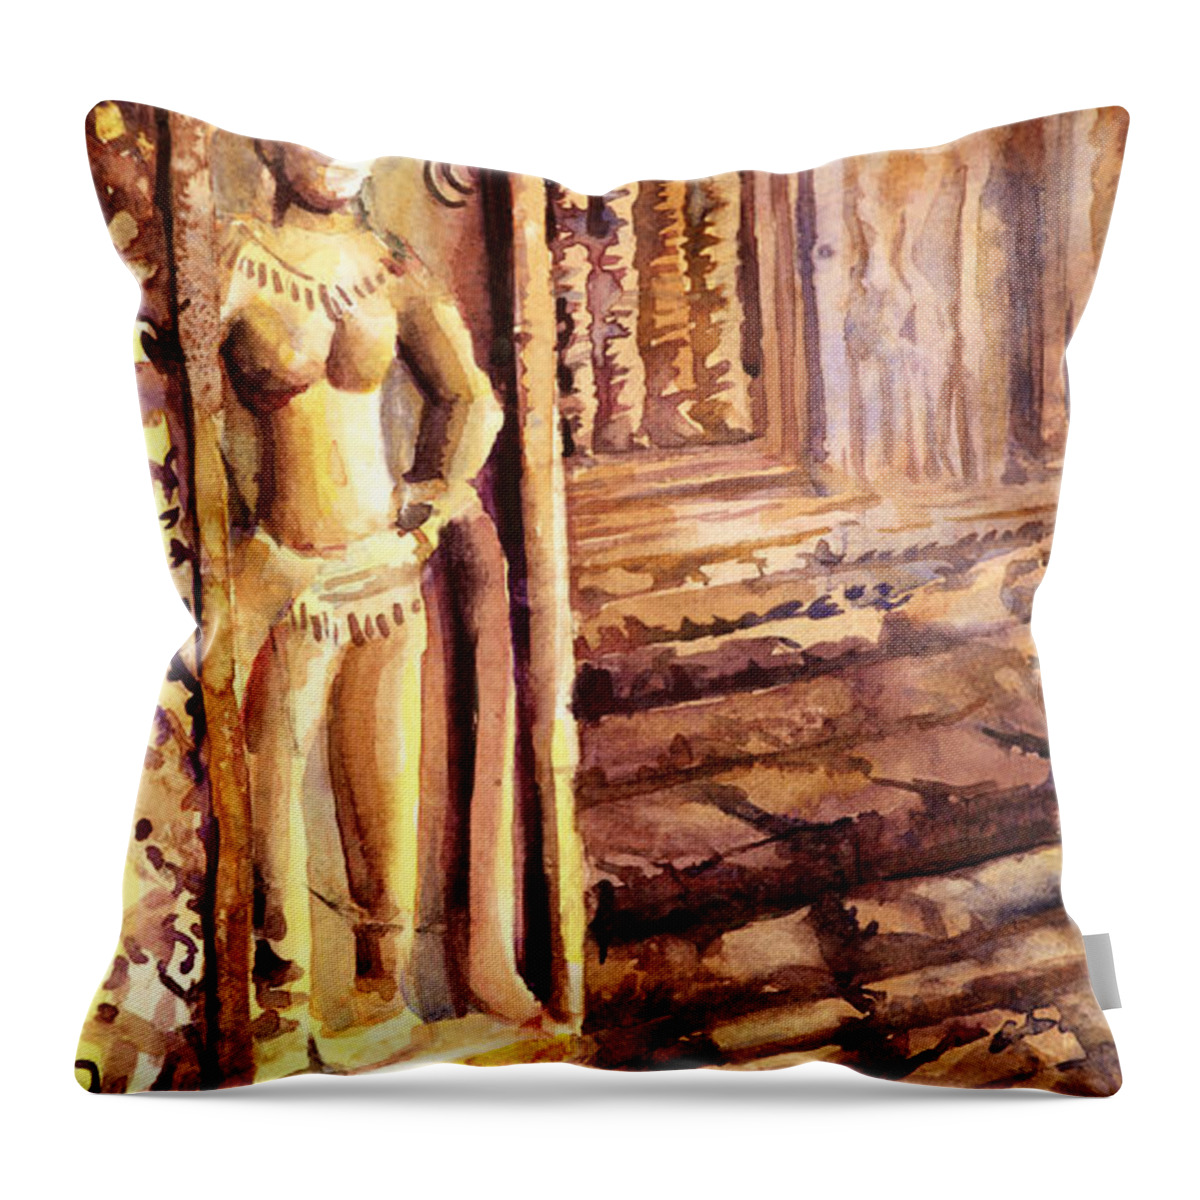 Ancient Throw Pillow featuring the painting Apsara Bas-Relief by Ryan Fox